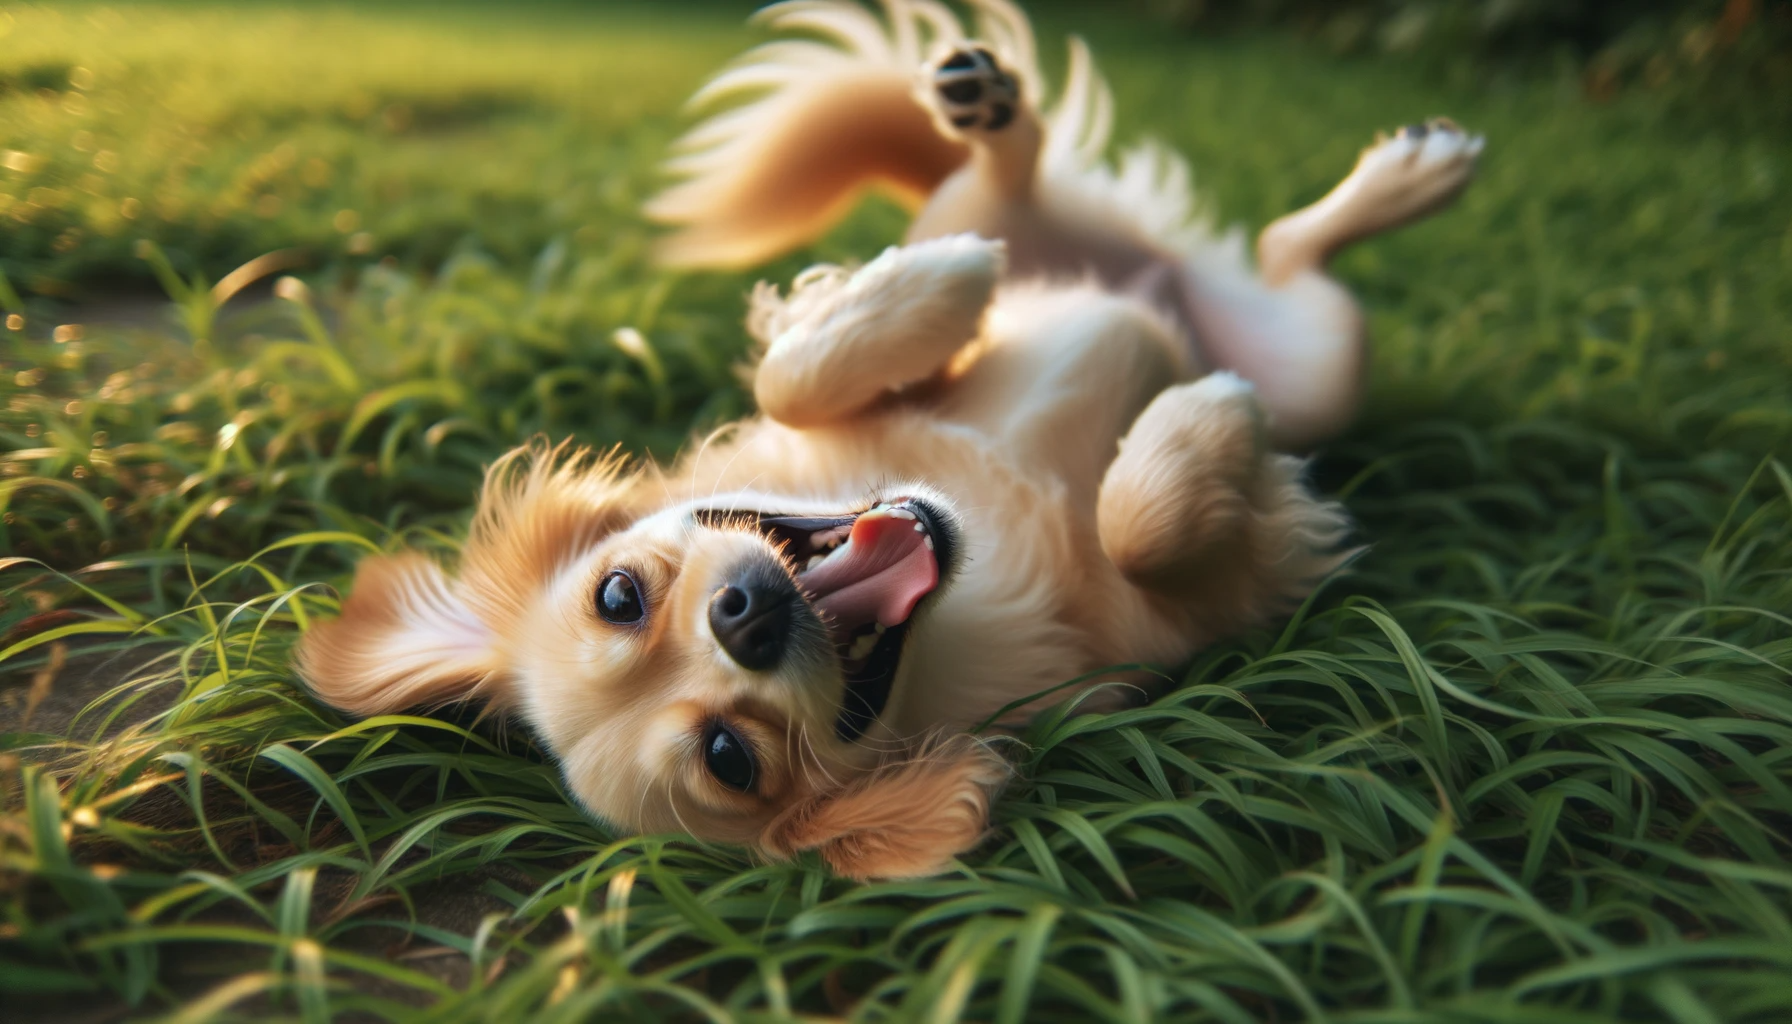 A Labrahuahua rolling in the grass with joy